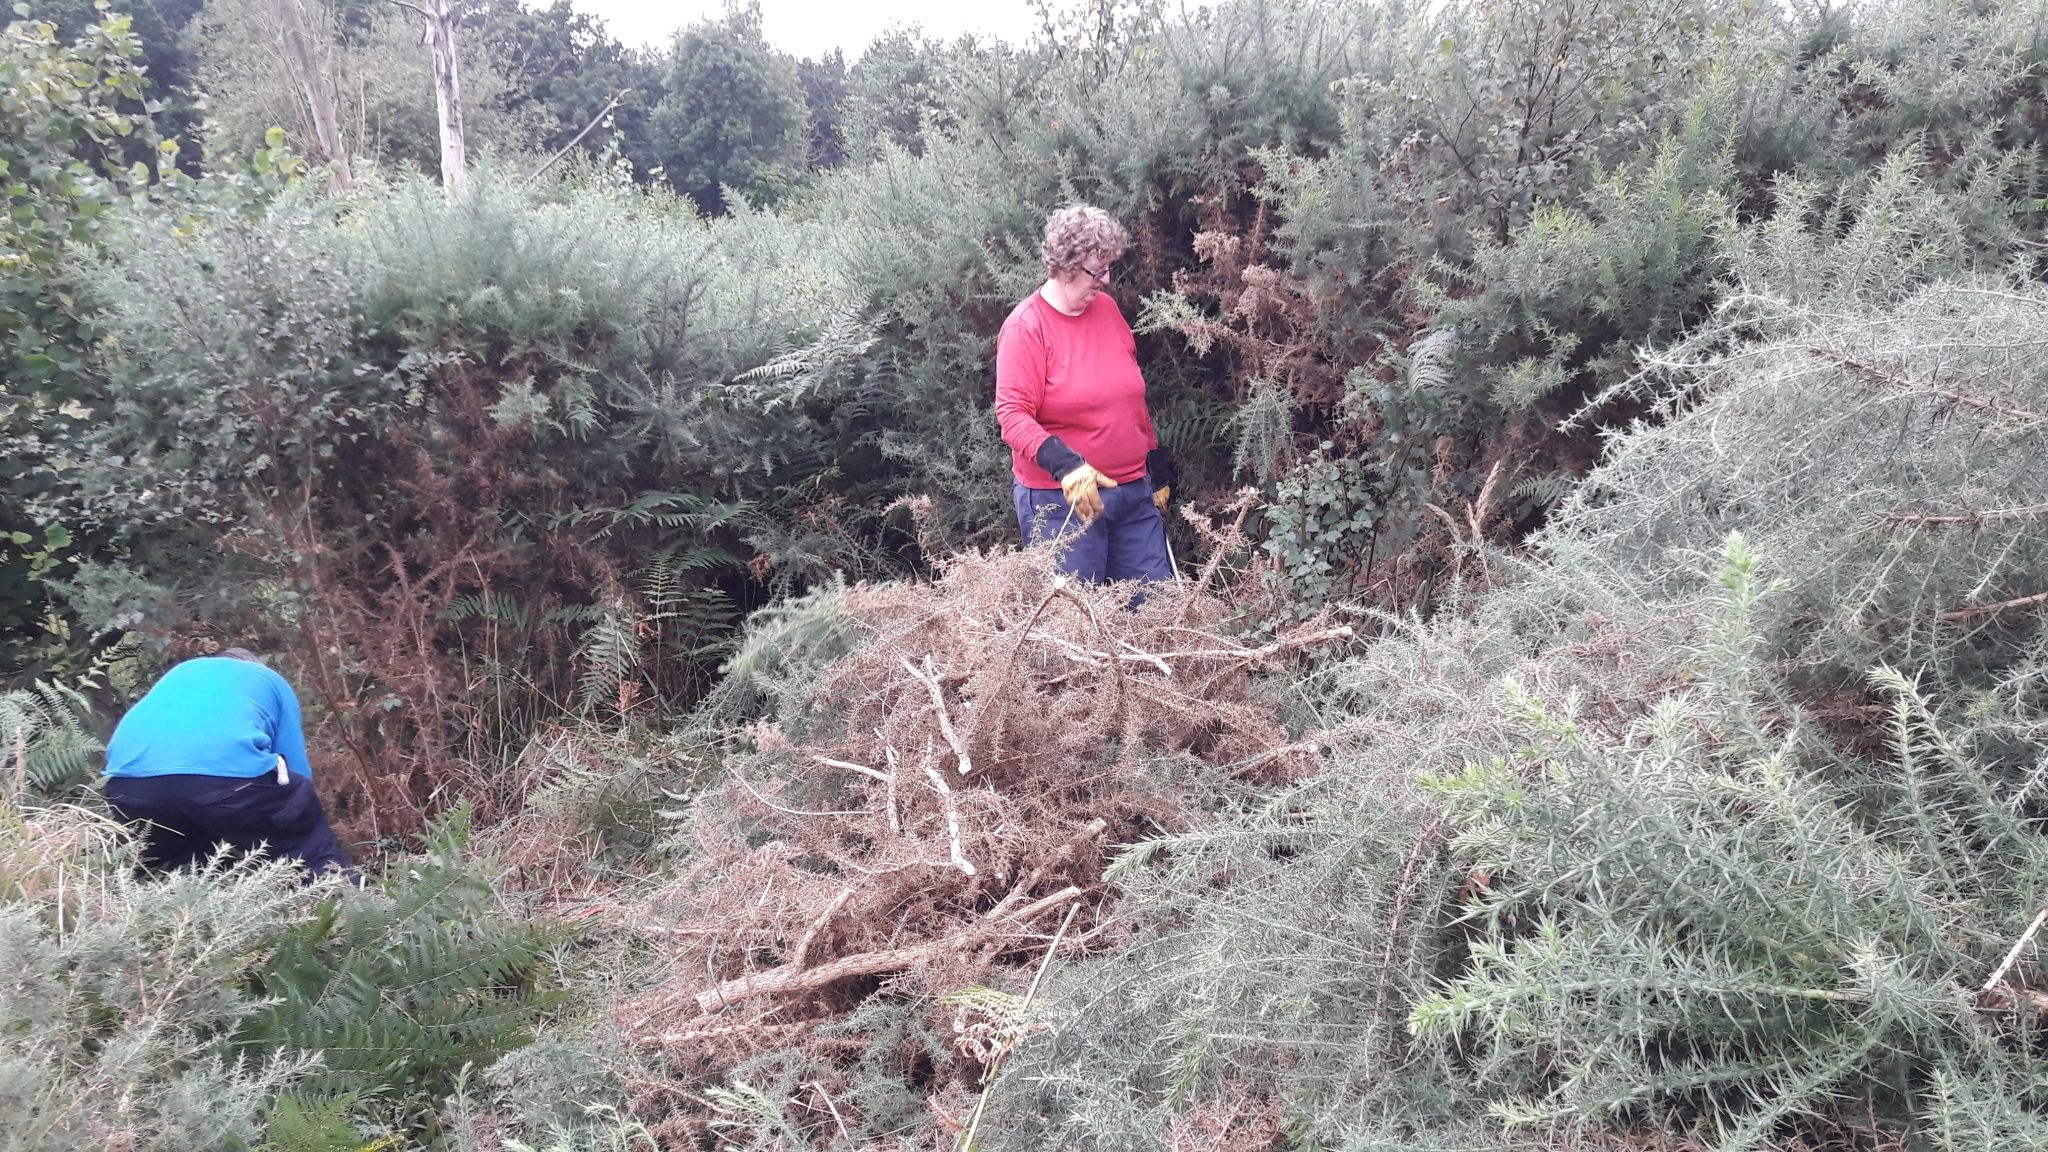 A photo from the FoTF Conservation Event - August 2018 - Gorse Removal at Hockham Hills & Holes : Volunteers at work amongst the Gorse